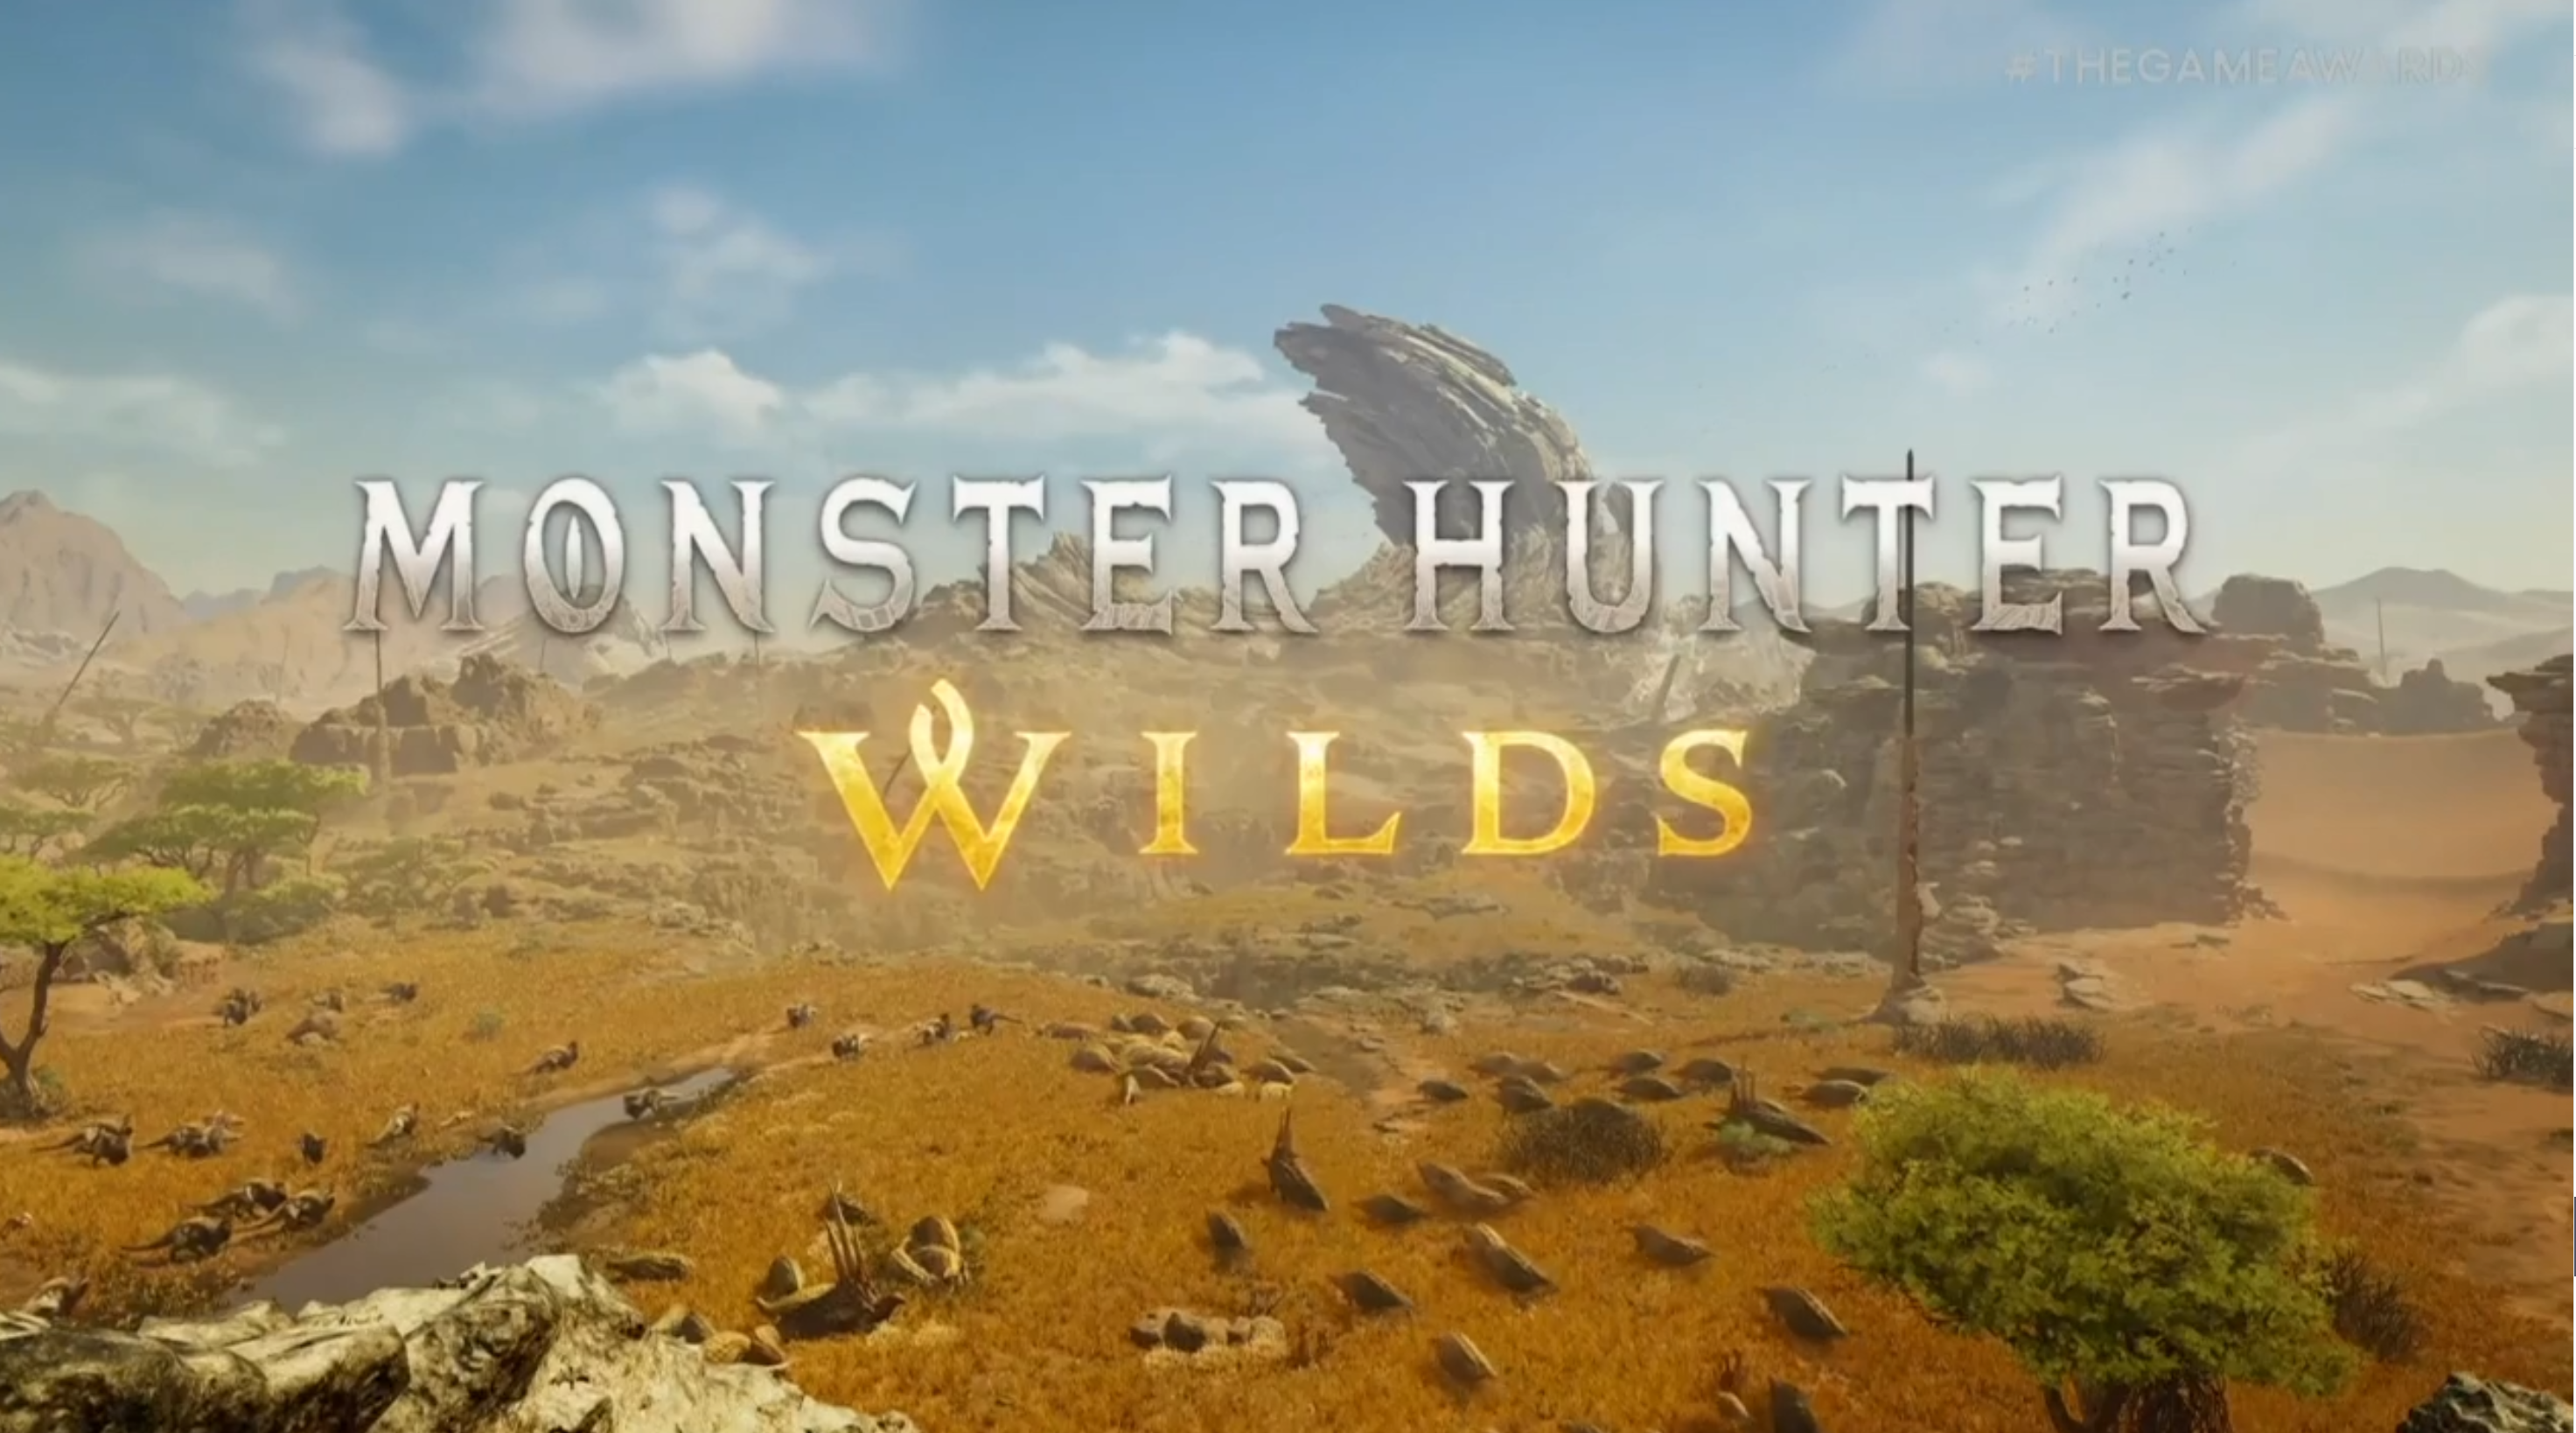 Monster Hunter Wilds announced for PS5, Xbox Series, and PC - Gematsu